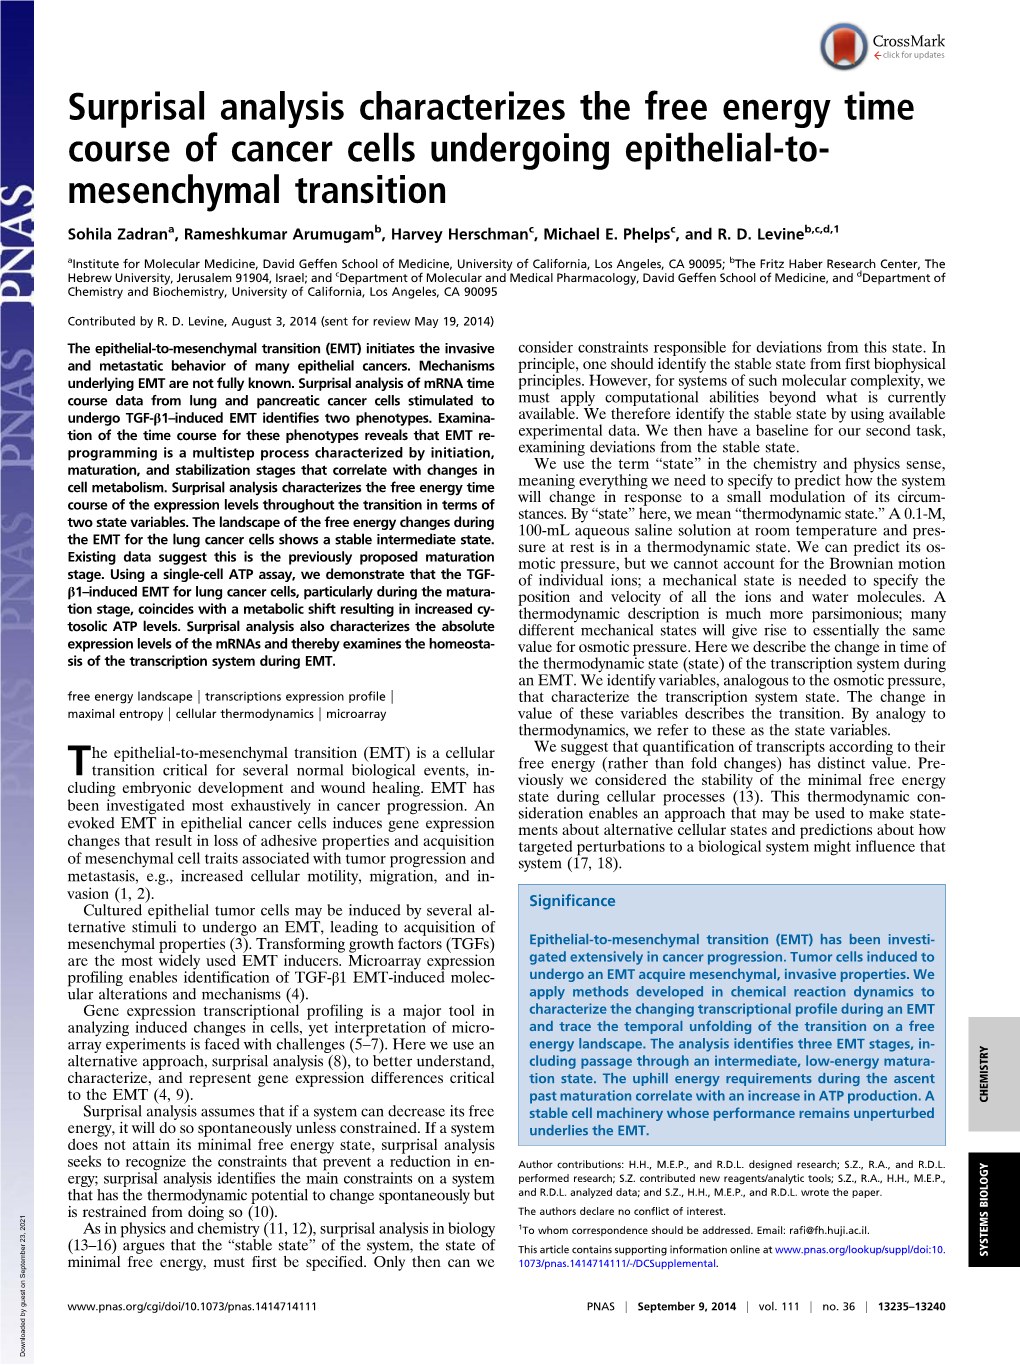 Surprisal Analysis Characterizes the Free Energy Time Course of Cancer Cells Undergoing Epithelial-To- Mesenchymal Transition